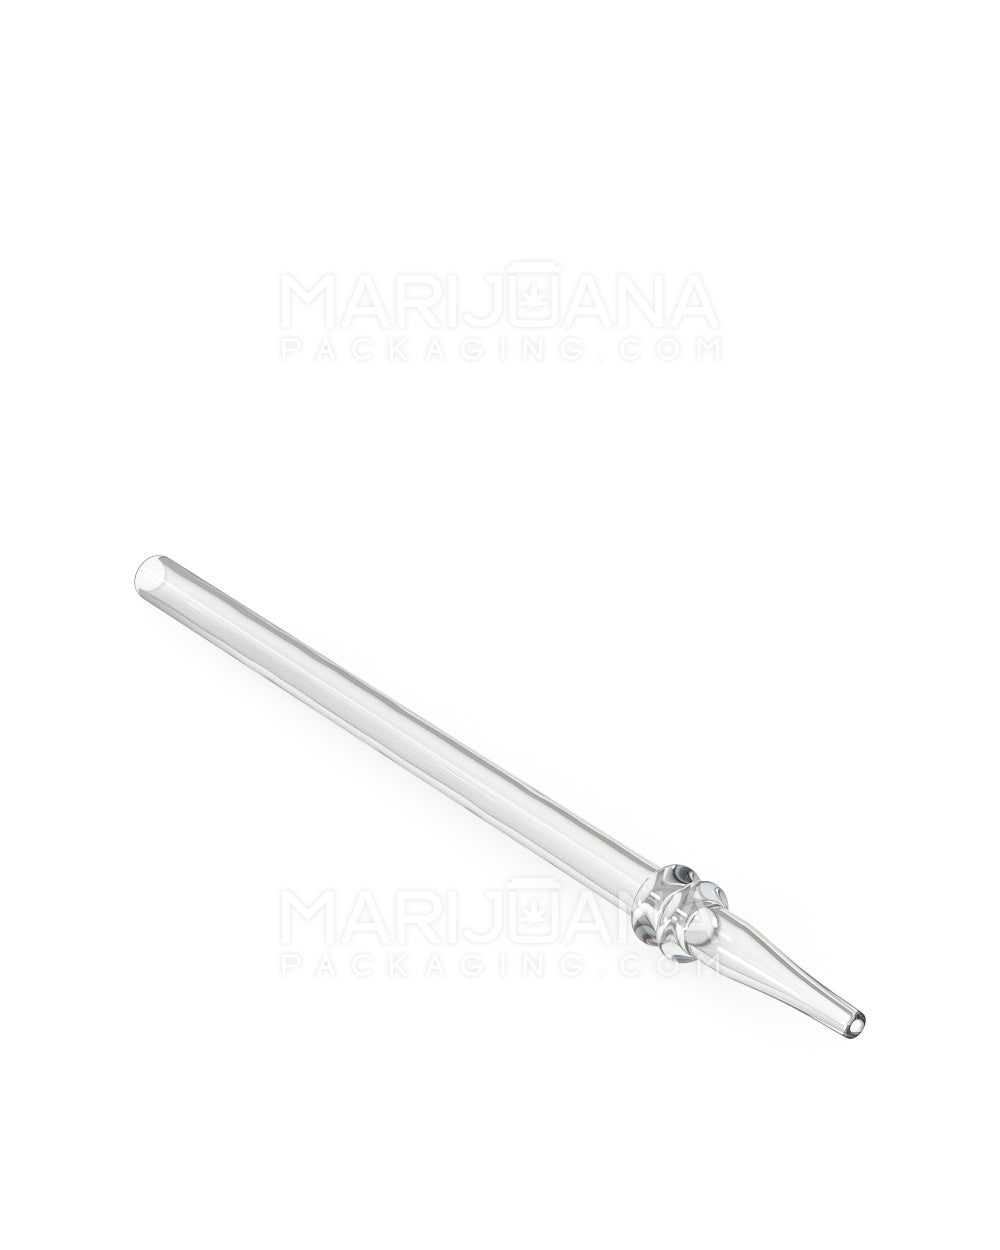 Assorted Mouthpiece Ringed Dab Straw | 6.5in Long - Glass - Clear - 9